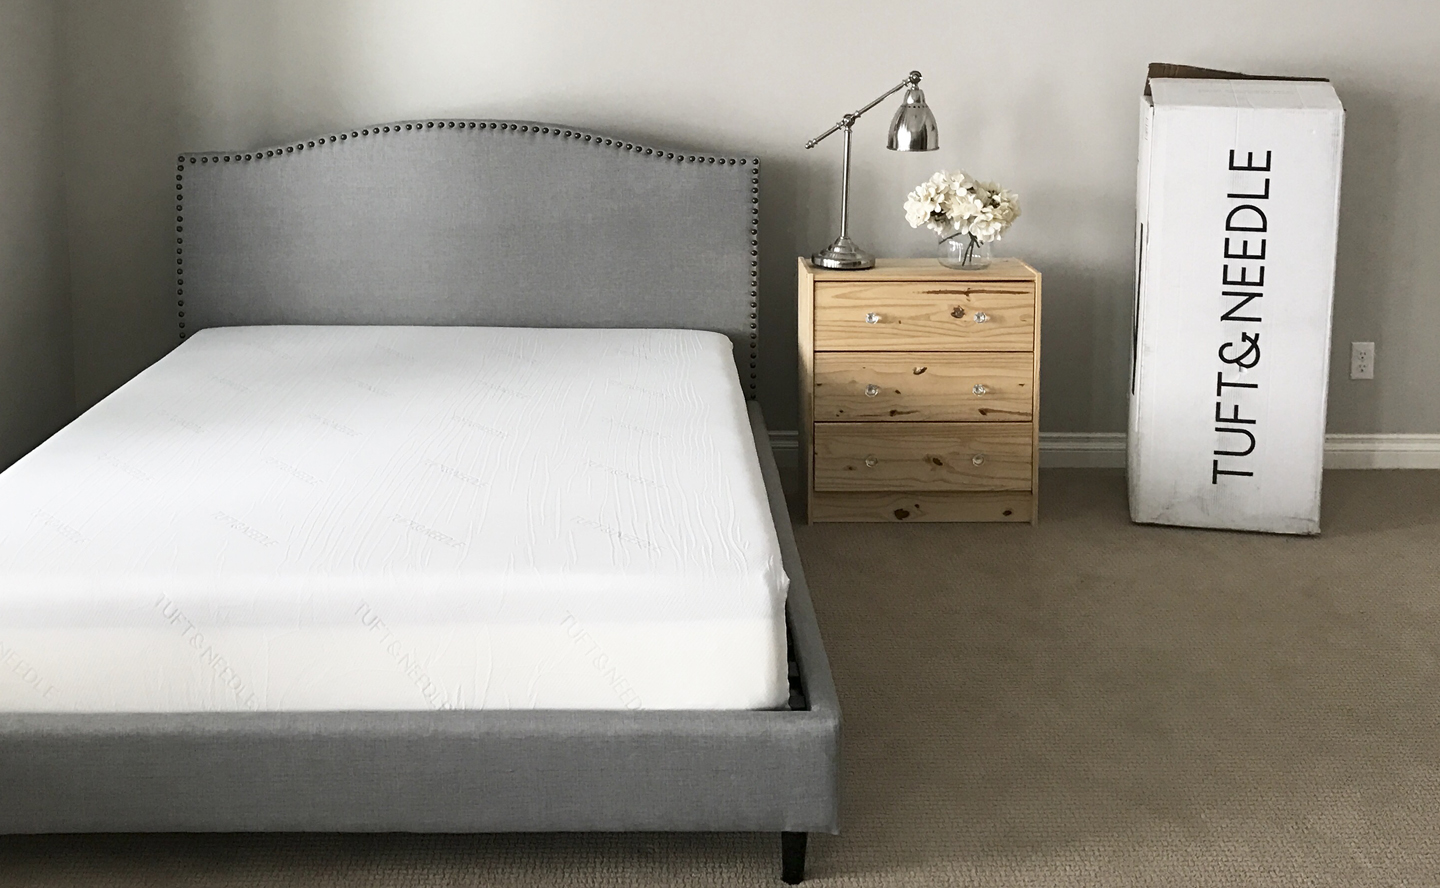 tuft and needle mattress review heavy person